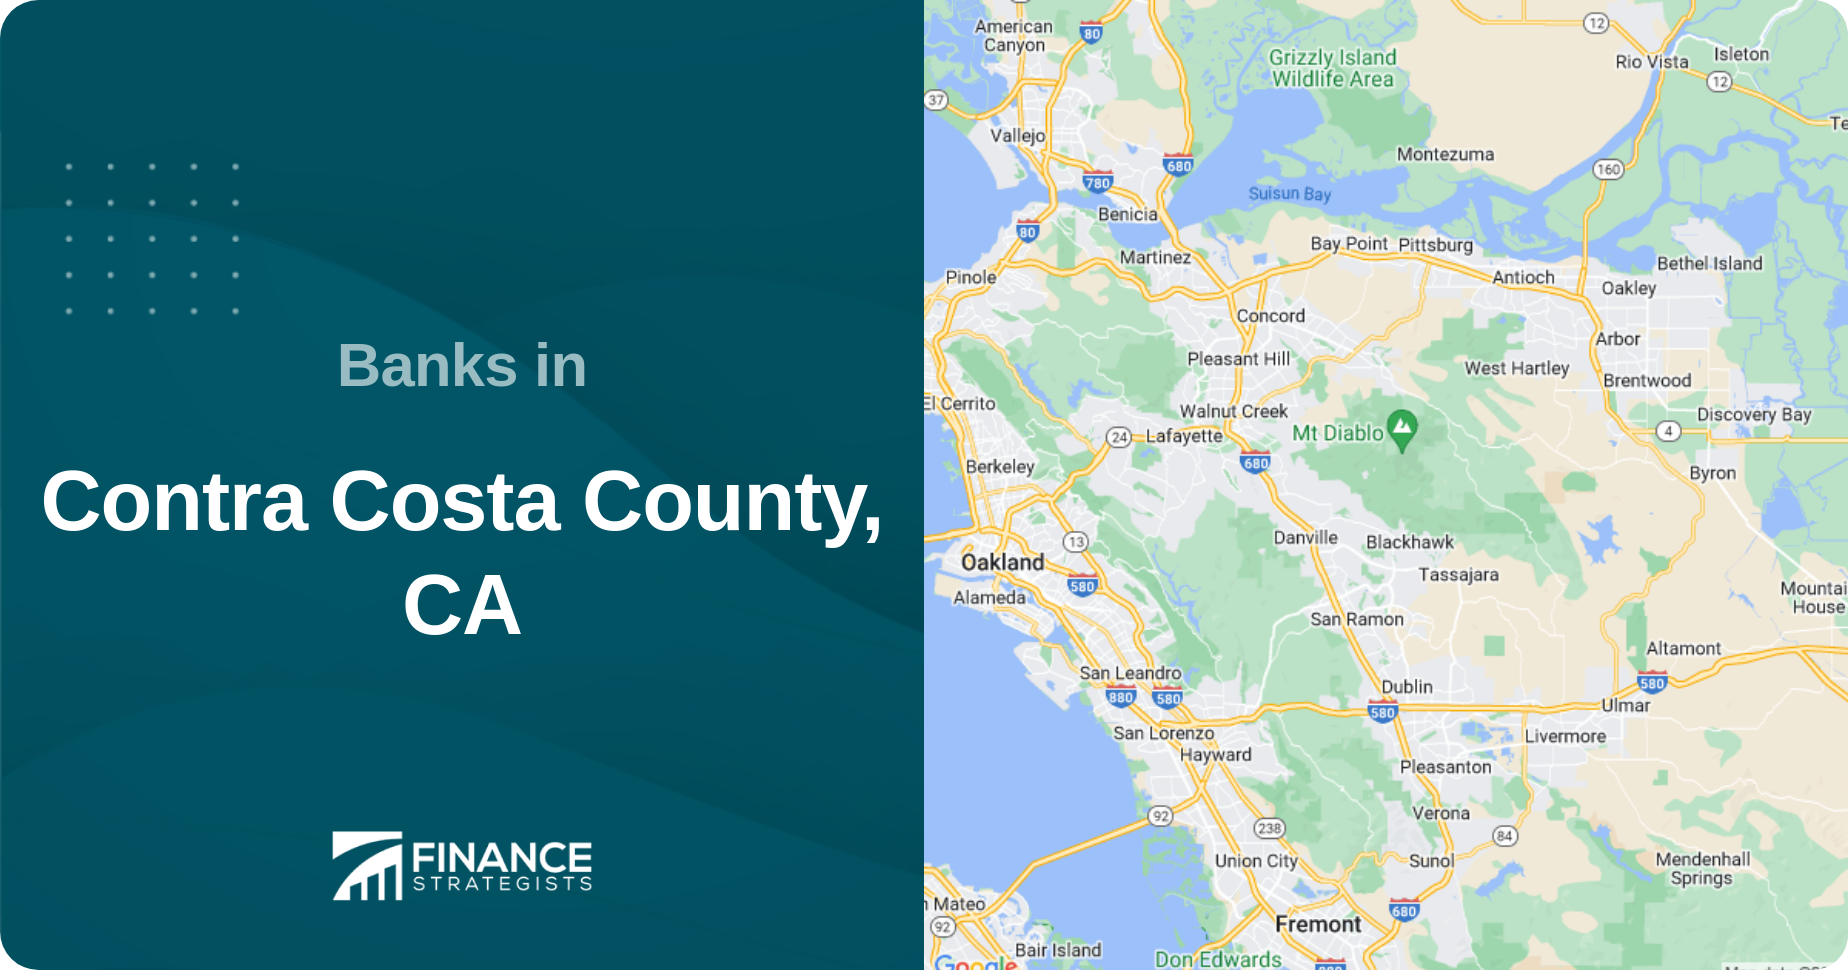 Banks in Contra Costa County, CA